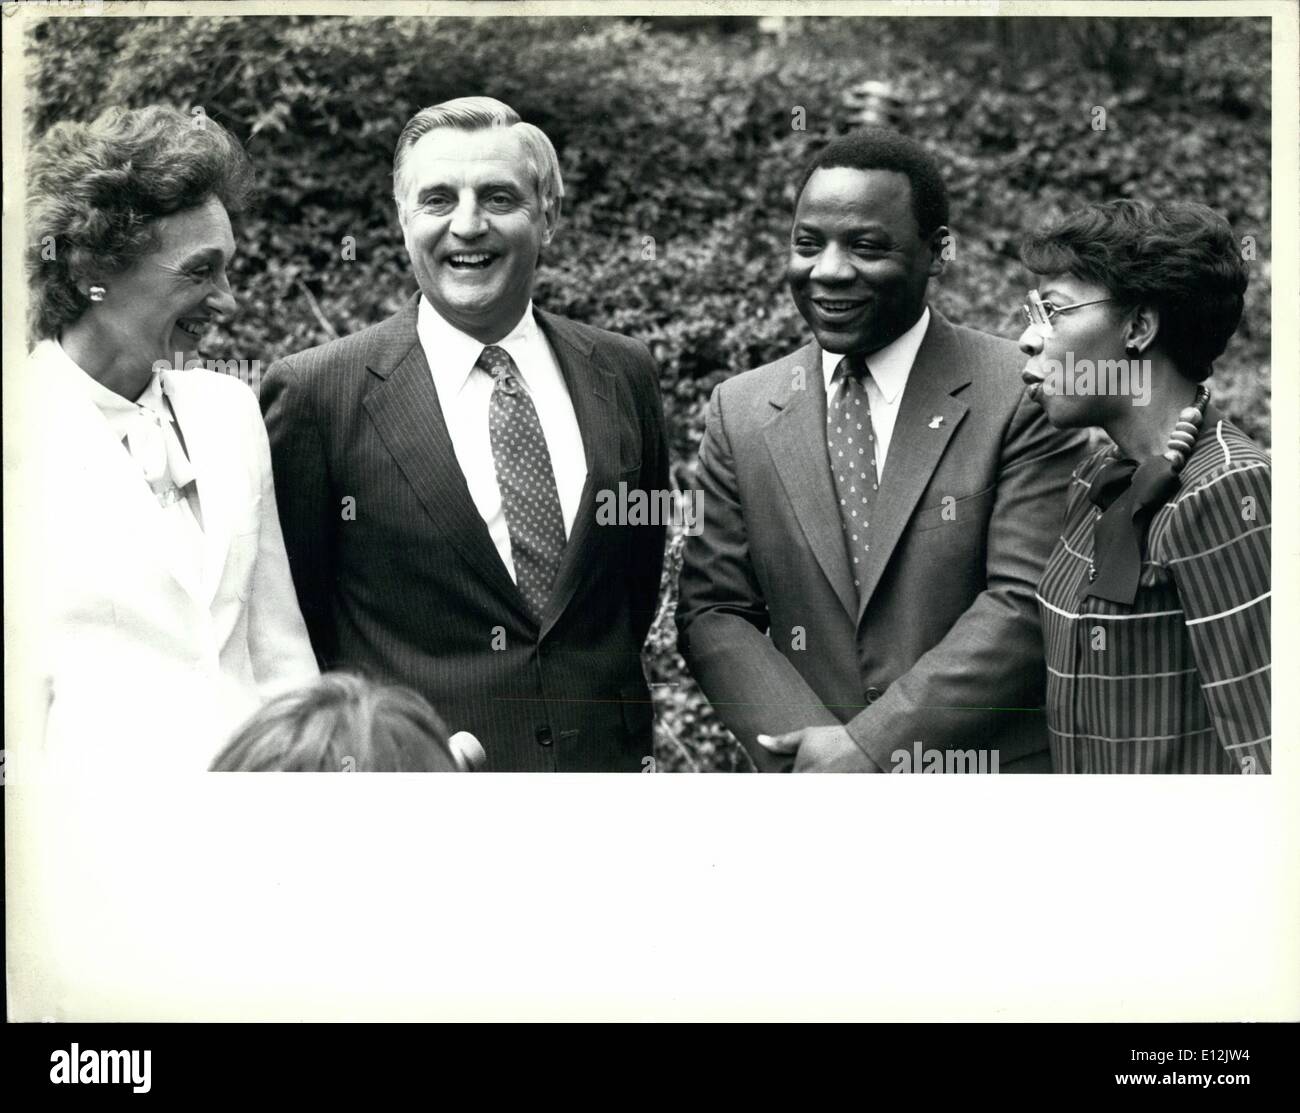 Feb. 24, 2012 - Mondale And Goode: Washington, D.C. 6/28/84. Presidential candidate Walter Mondale received Philadelphia Mayor Wilson Goode at his home in Northwest Washington today for a discussion about the Vice Presidential position on the Democratic ticket. Stock Photo